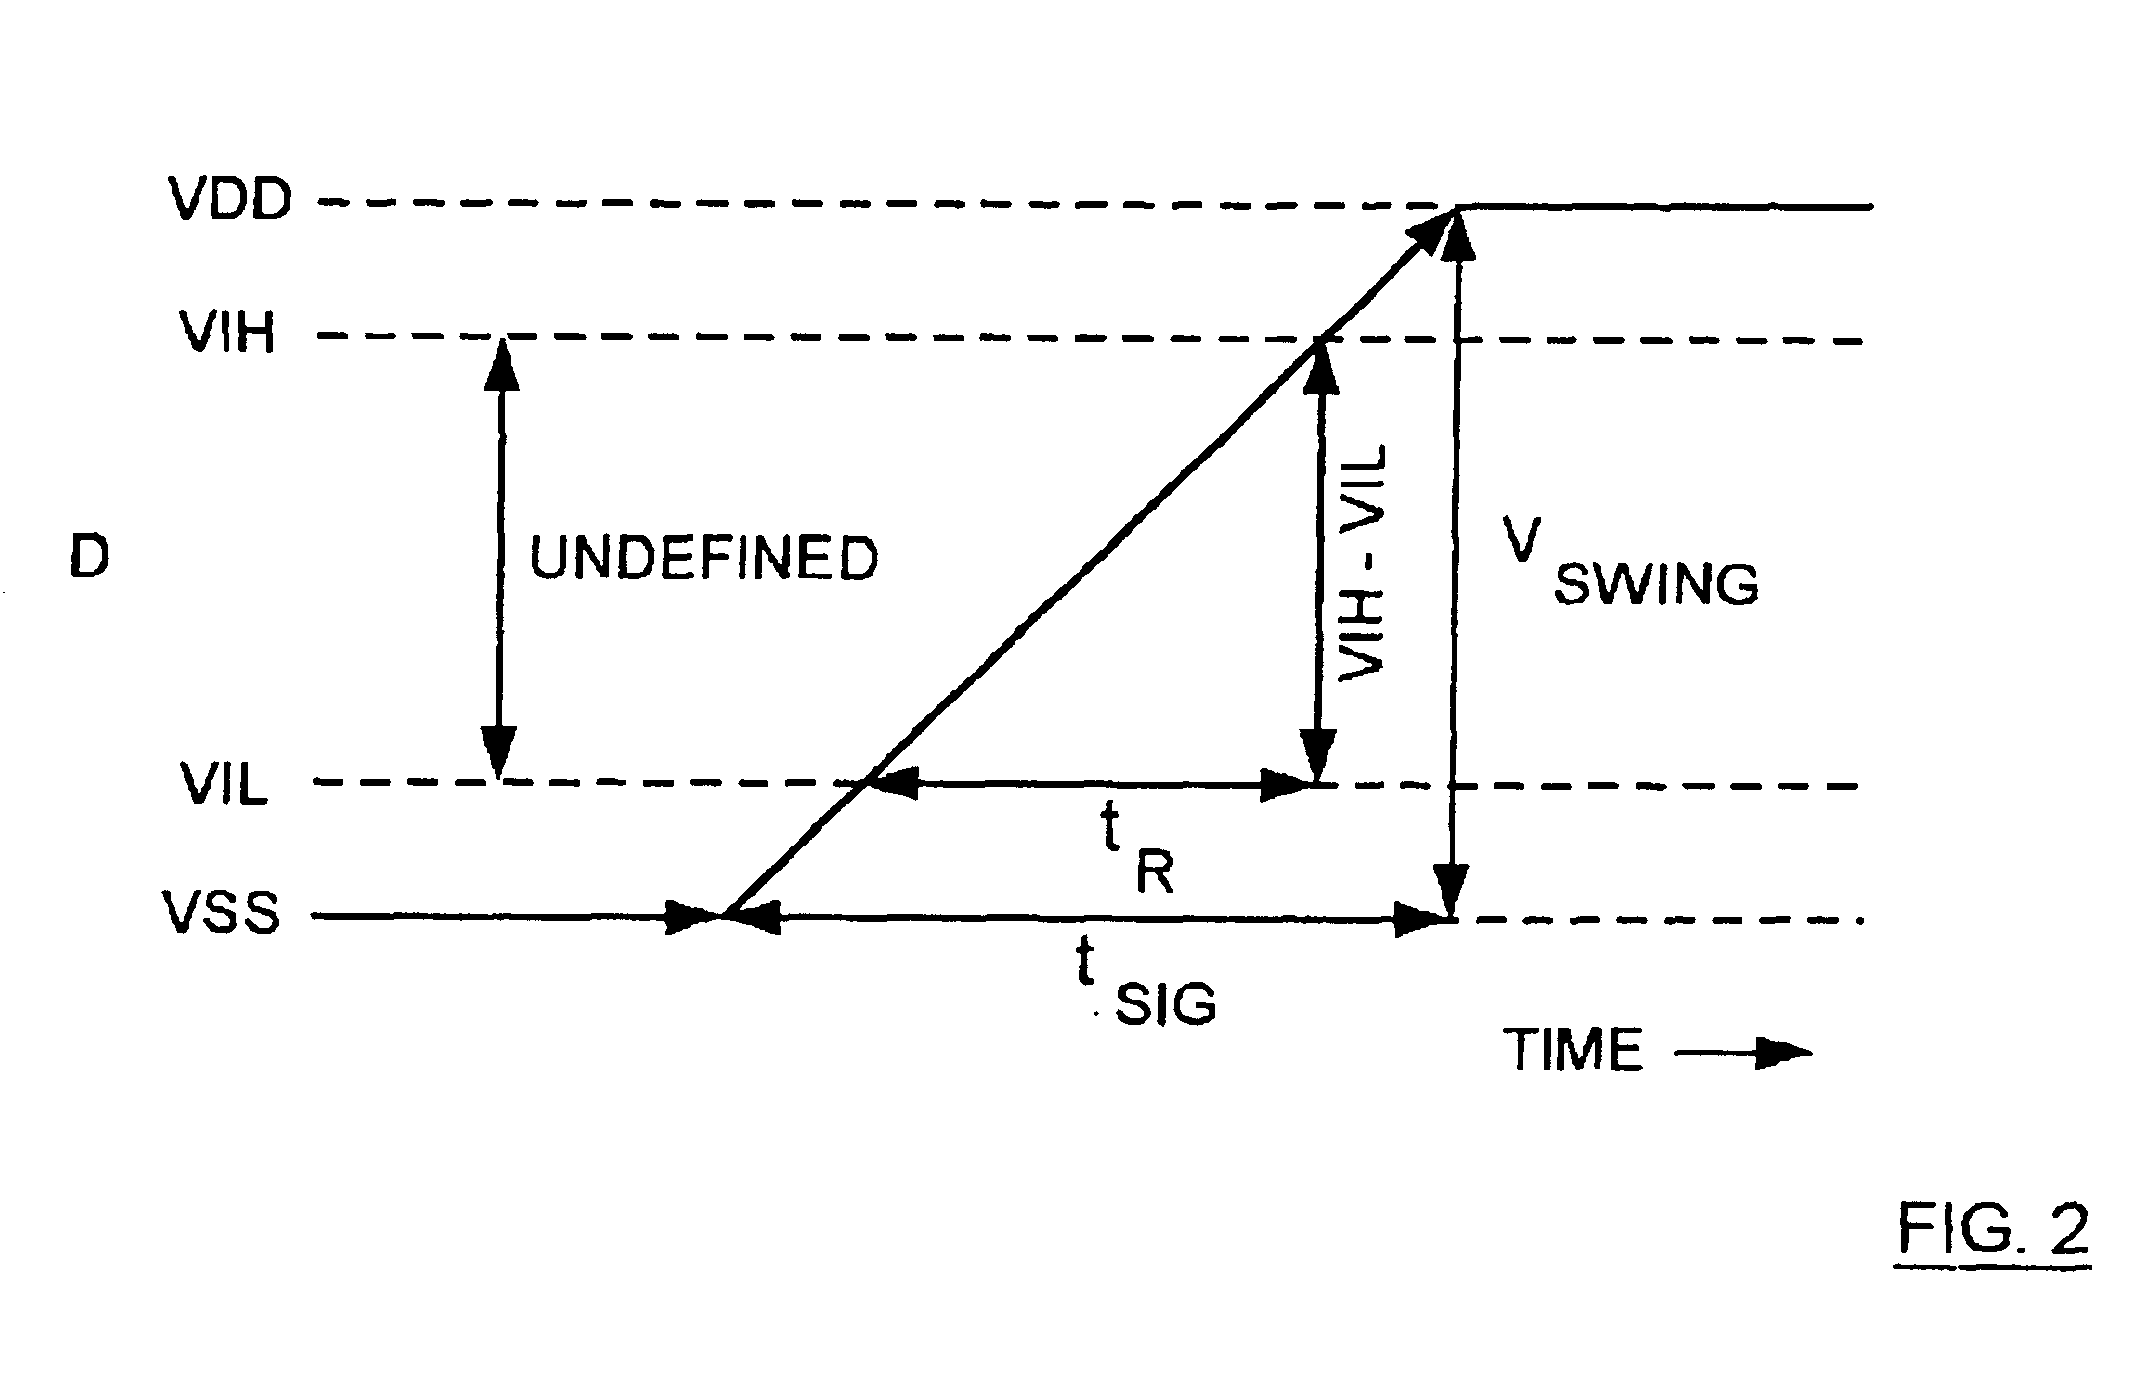 Clock signal selector circuit with reduced probability of erroneous output due to metastability